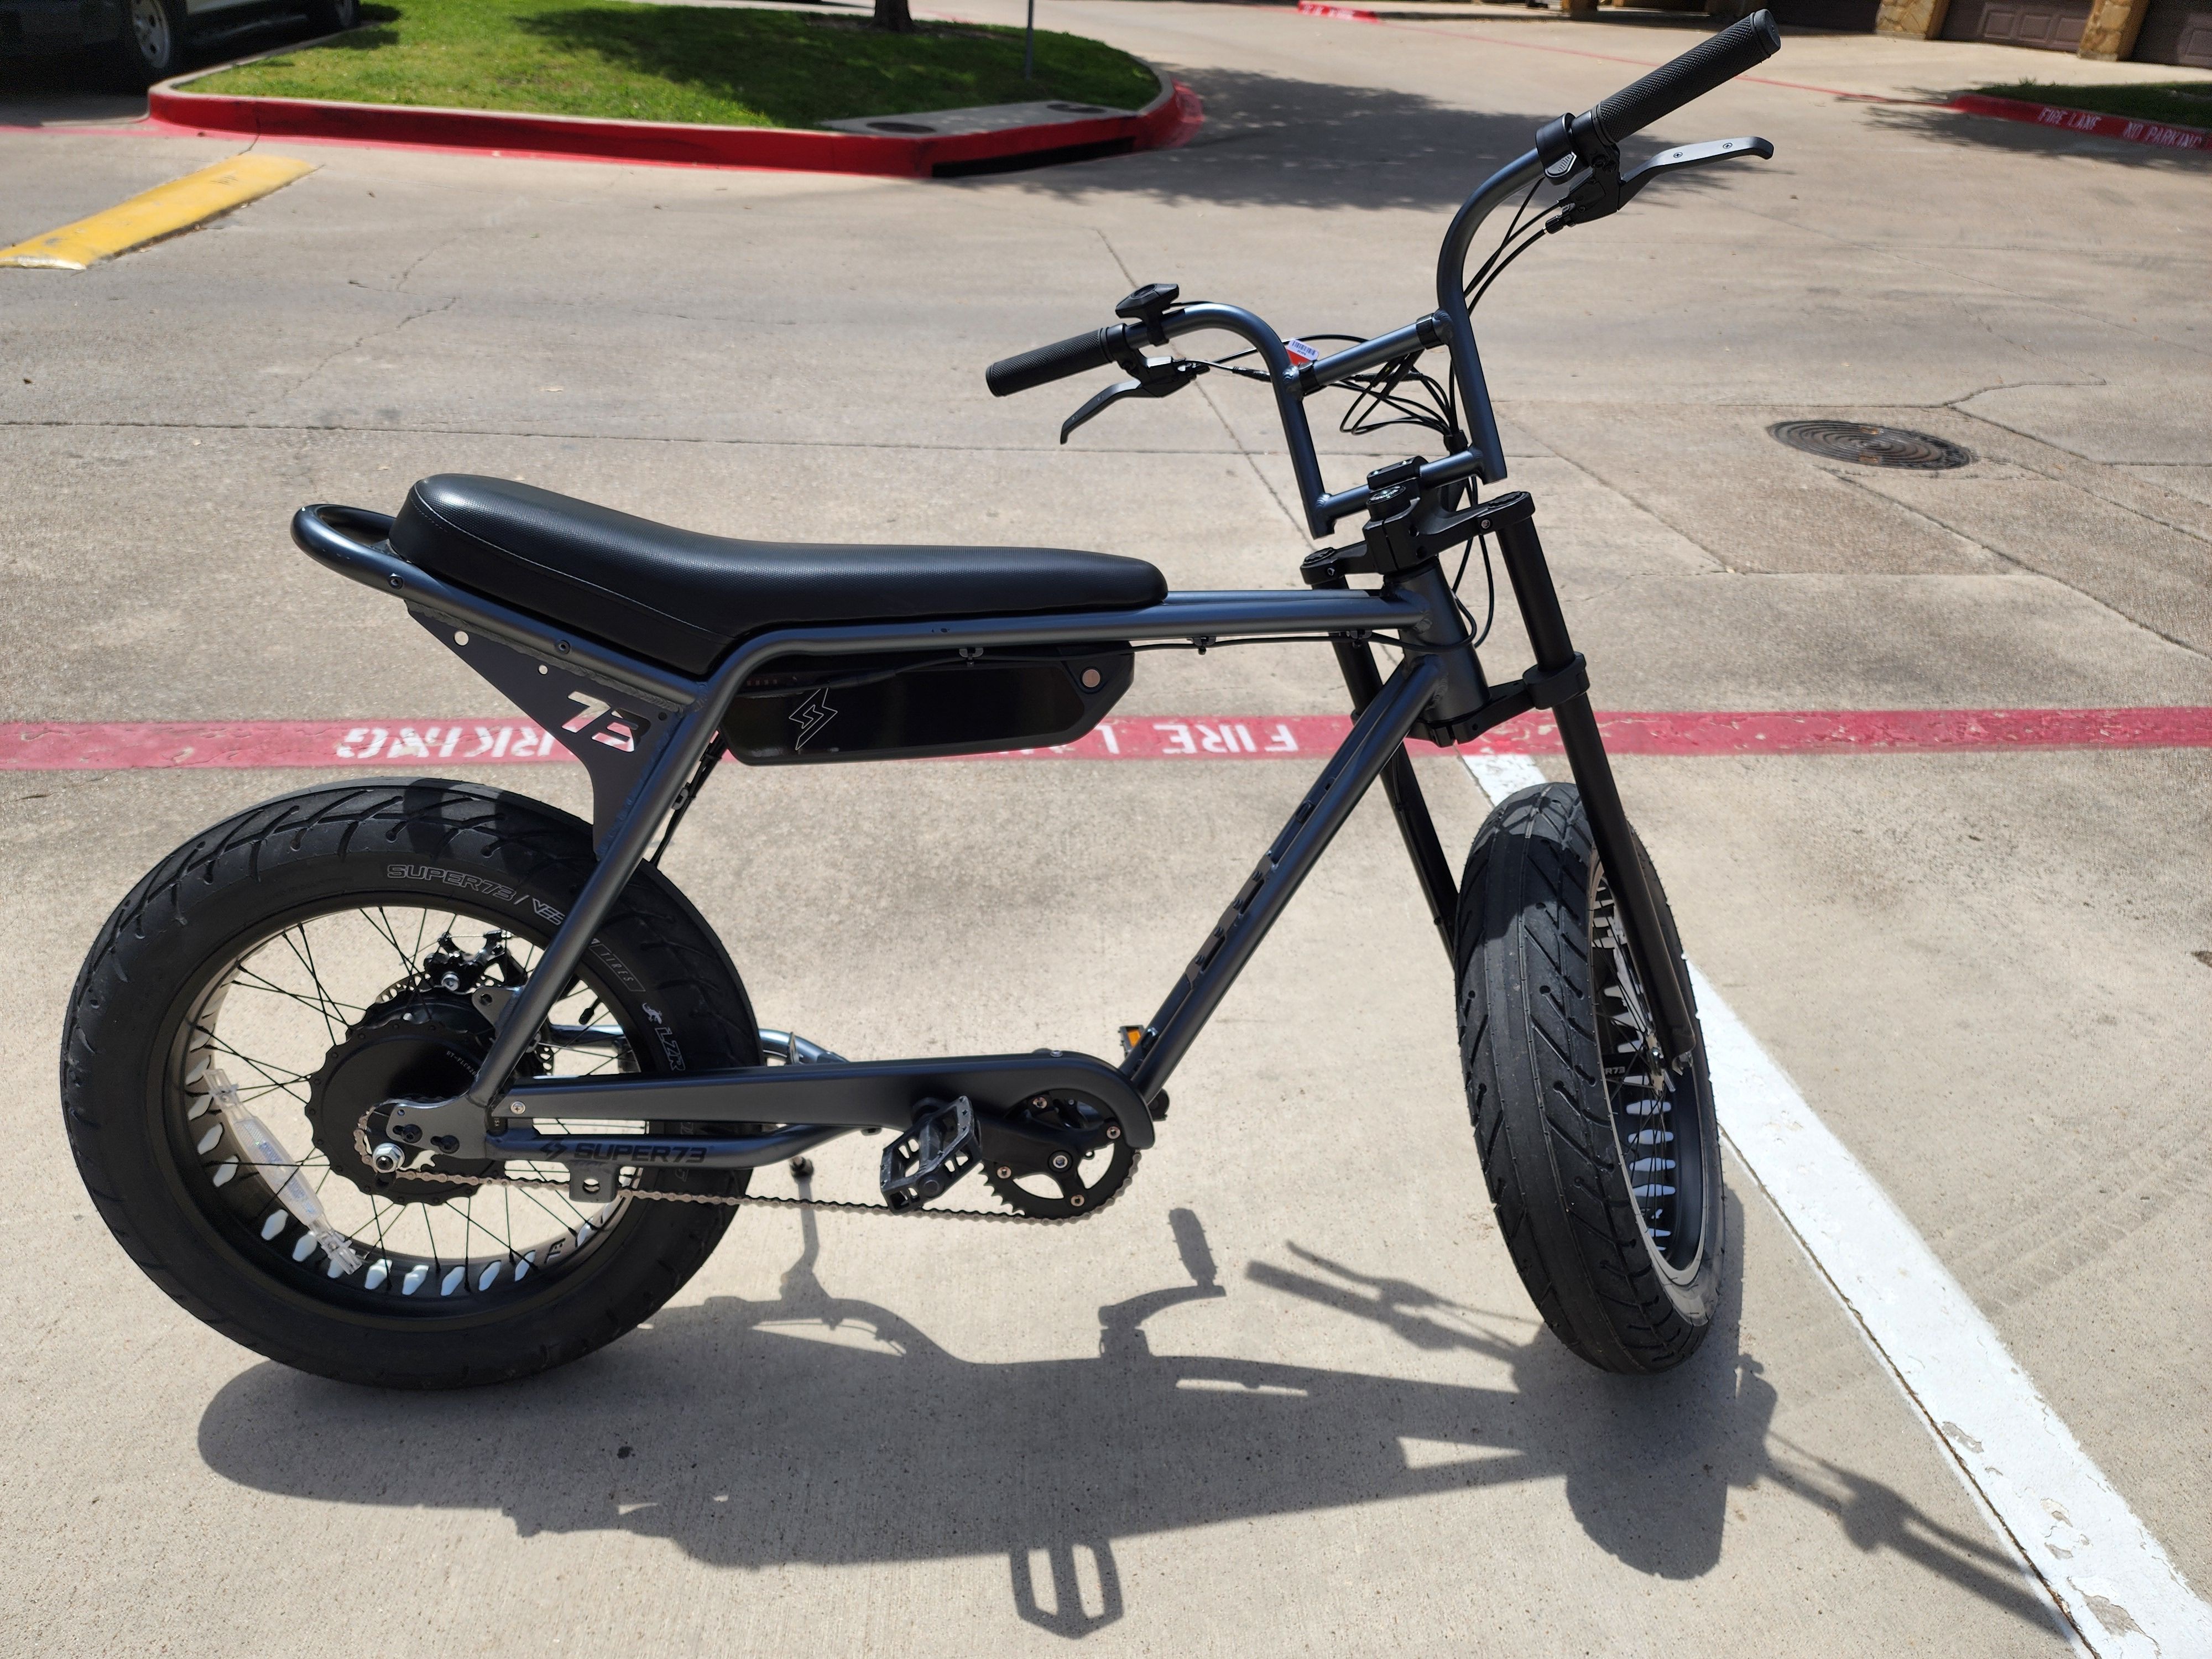 Super73 ZX used in M | buycycle USA